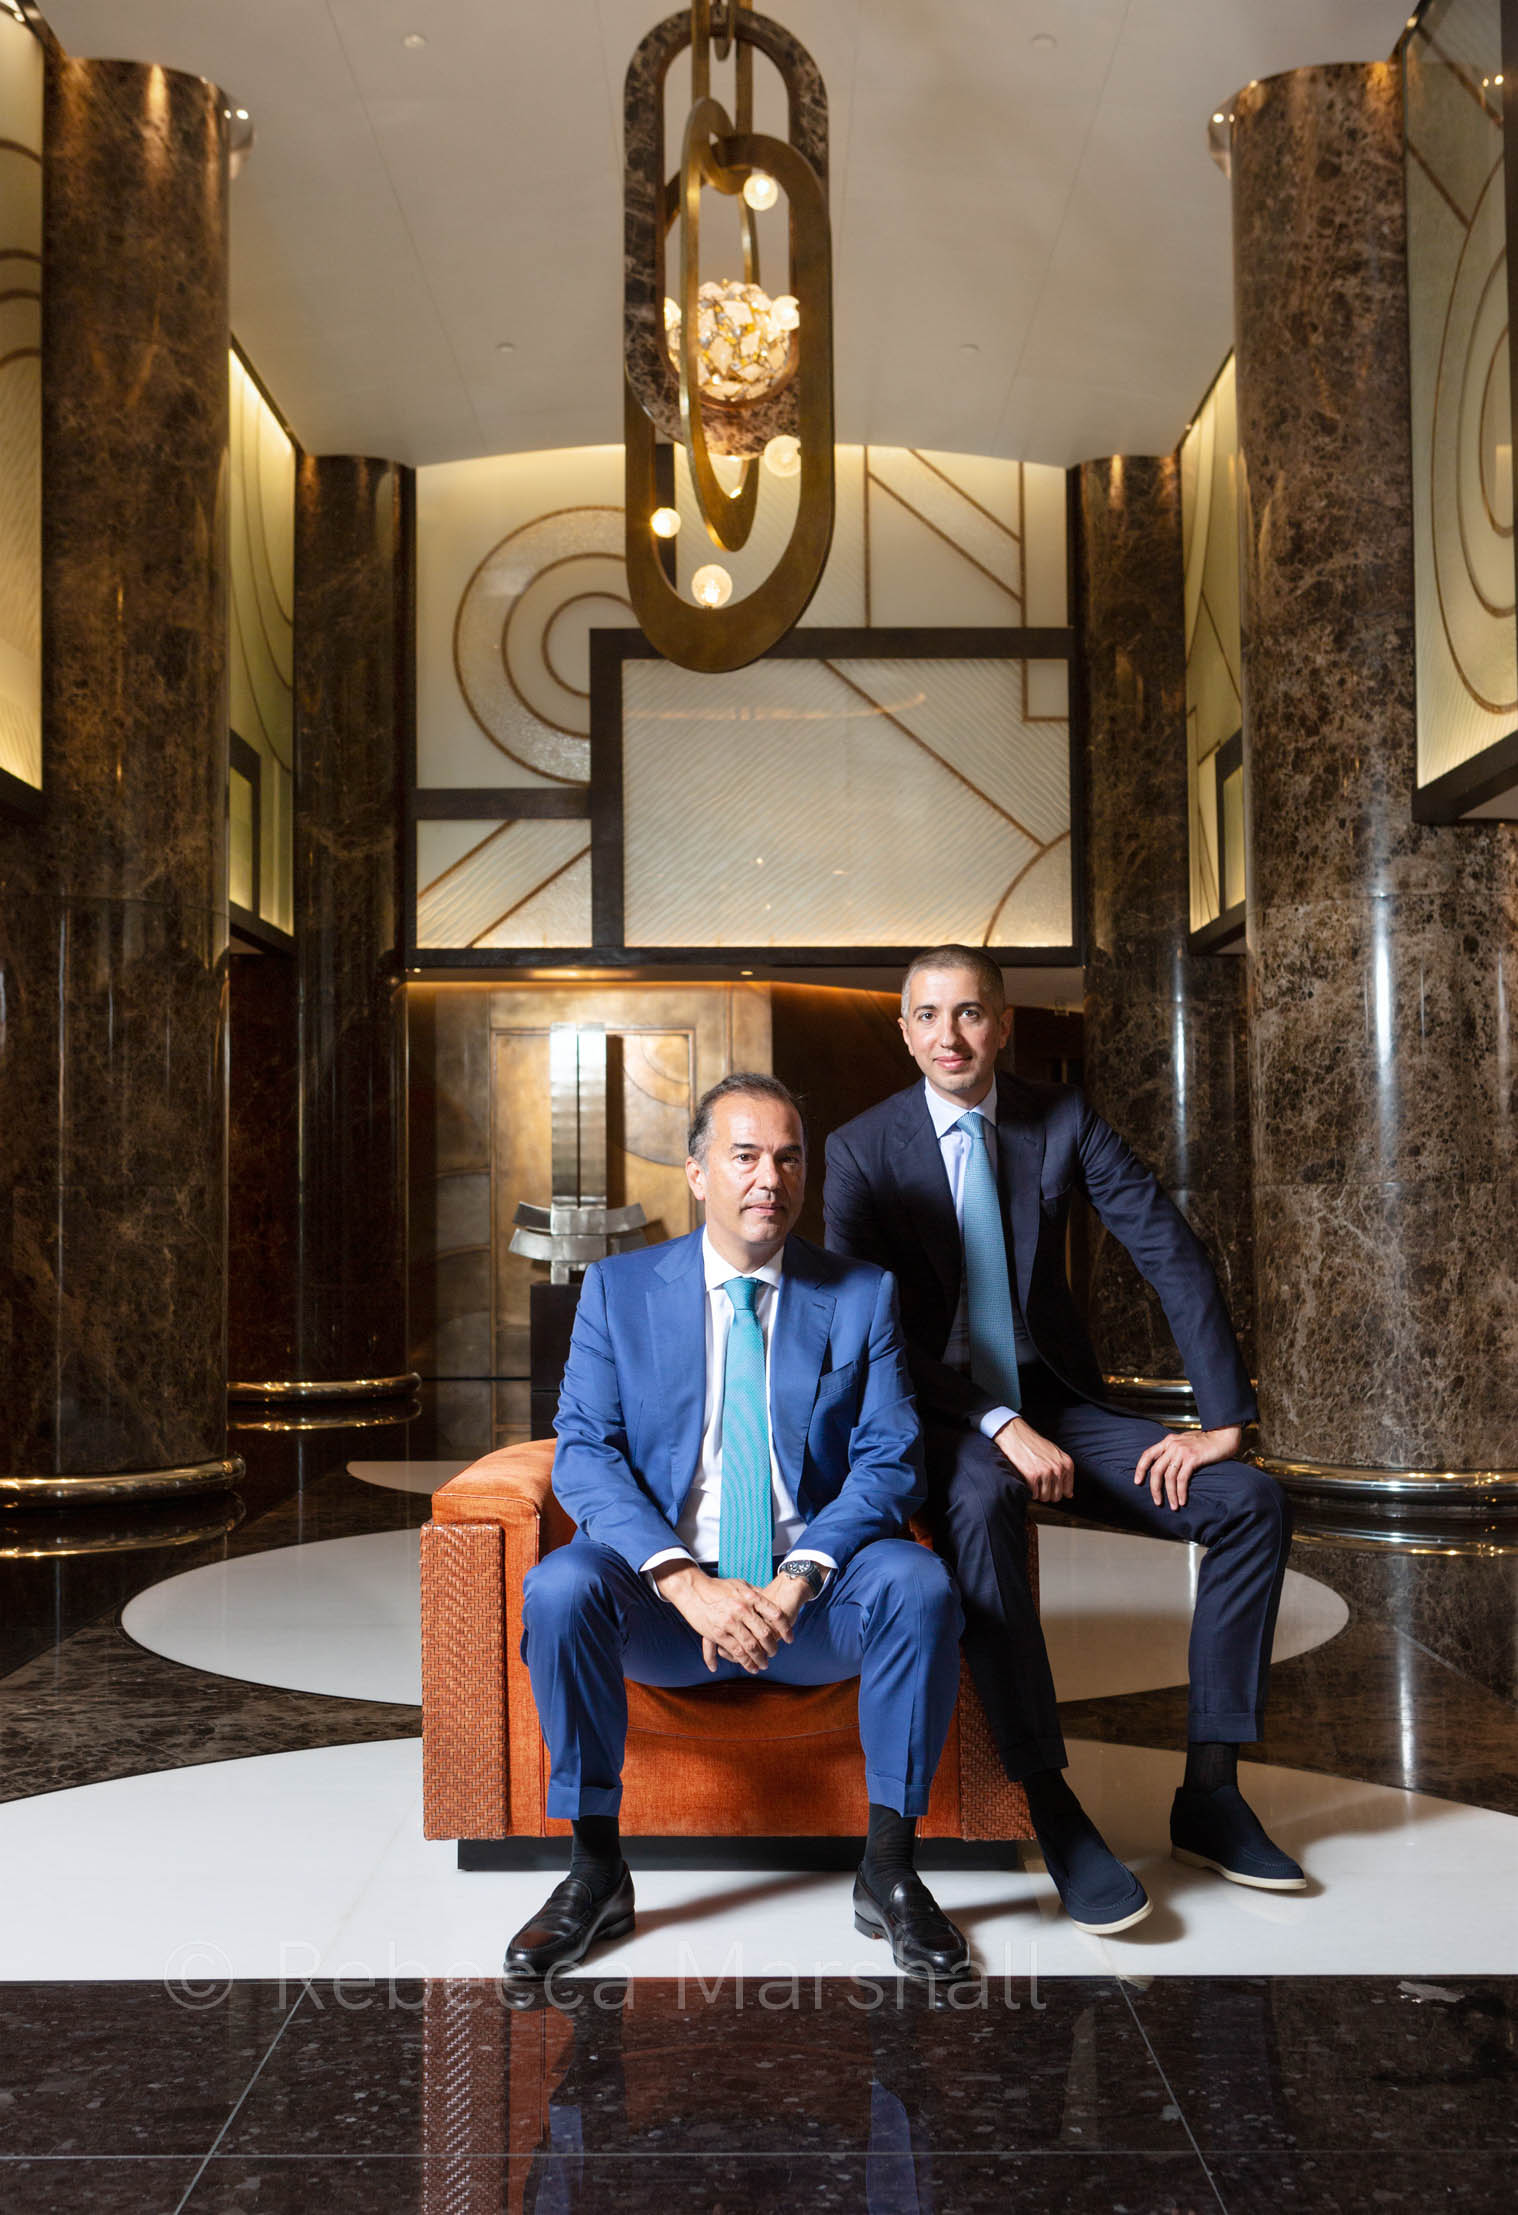 Two men in suits sit on an orange armchair in the foyer of a luxury residence